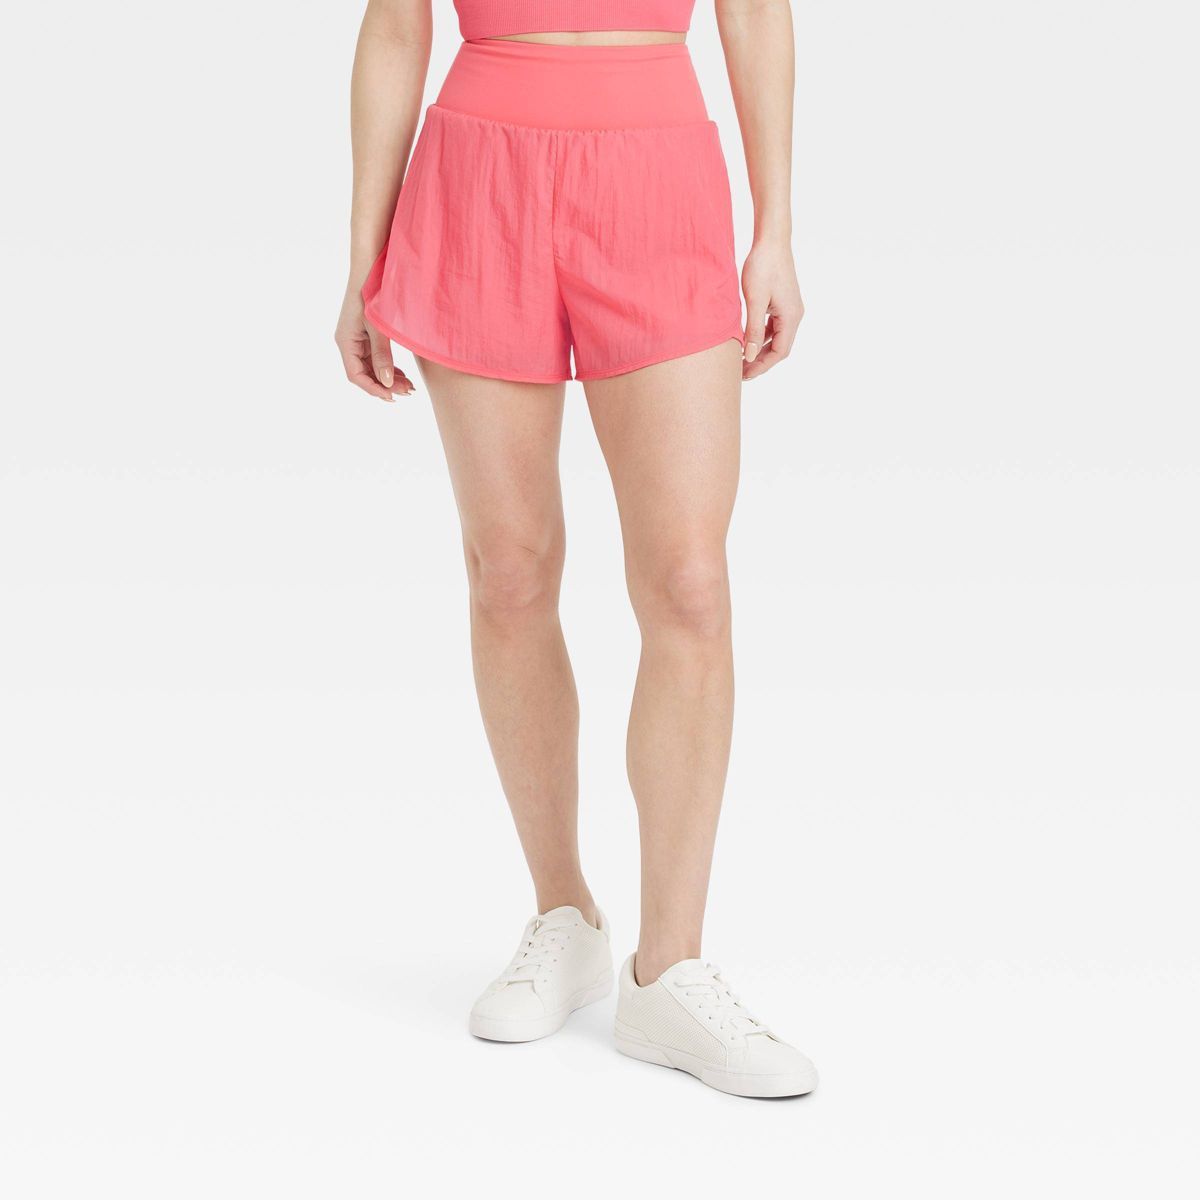 Women's Woven High-Rise 2-in-1 Run Shorts 3" - All In Motion™ Coral Pink M | Target